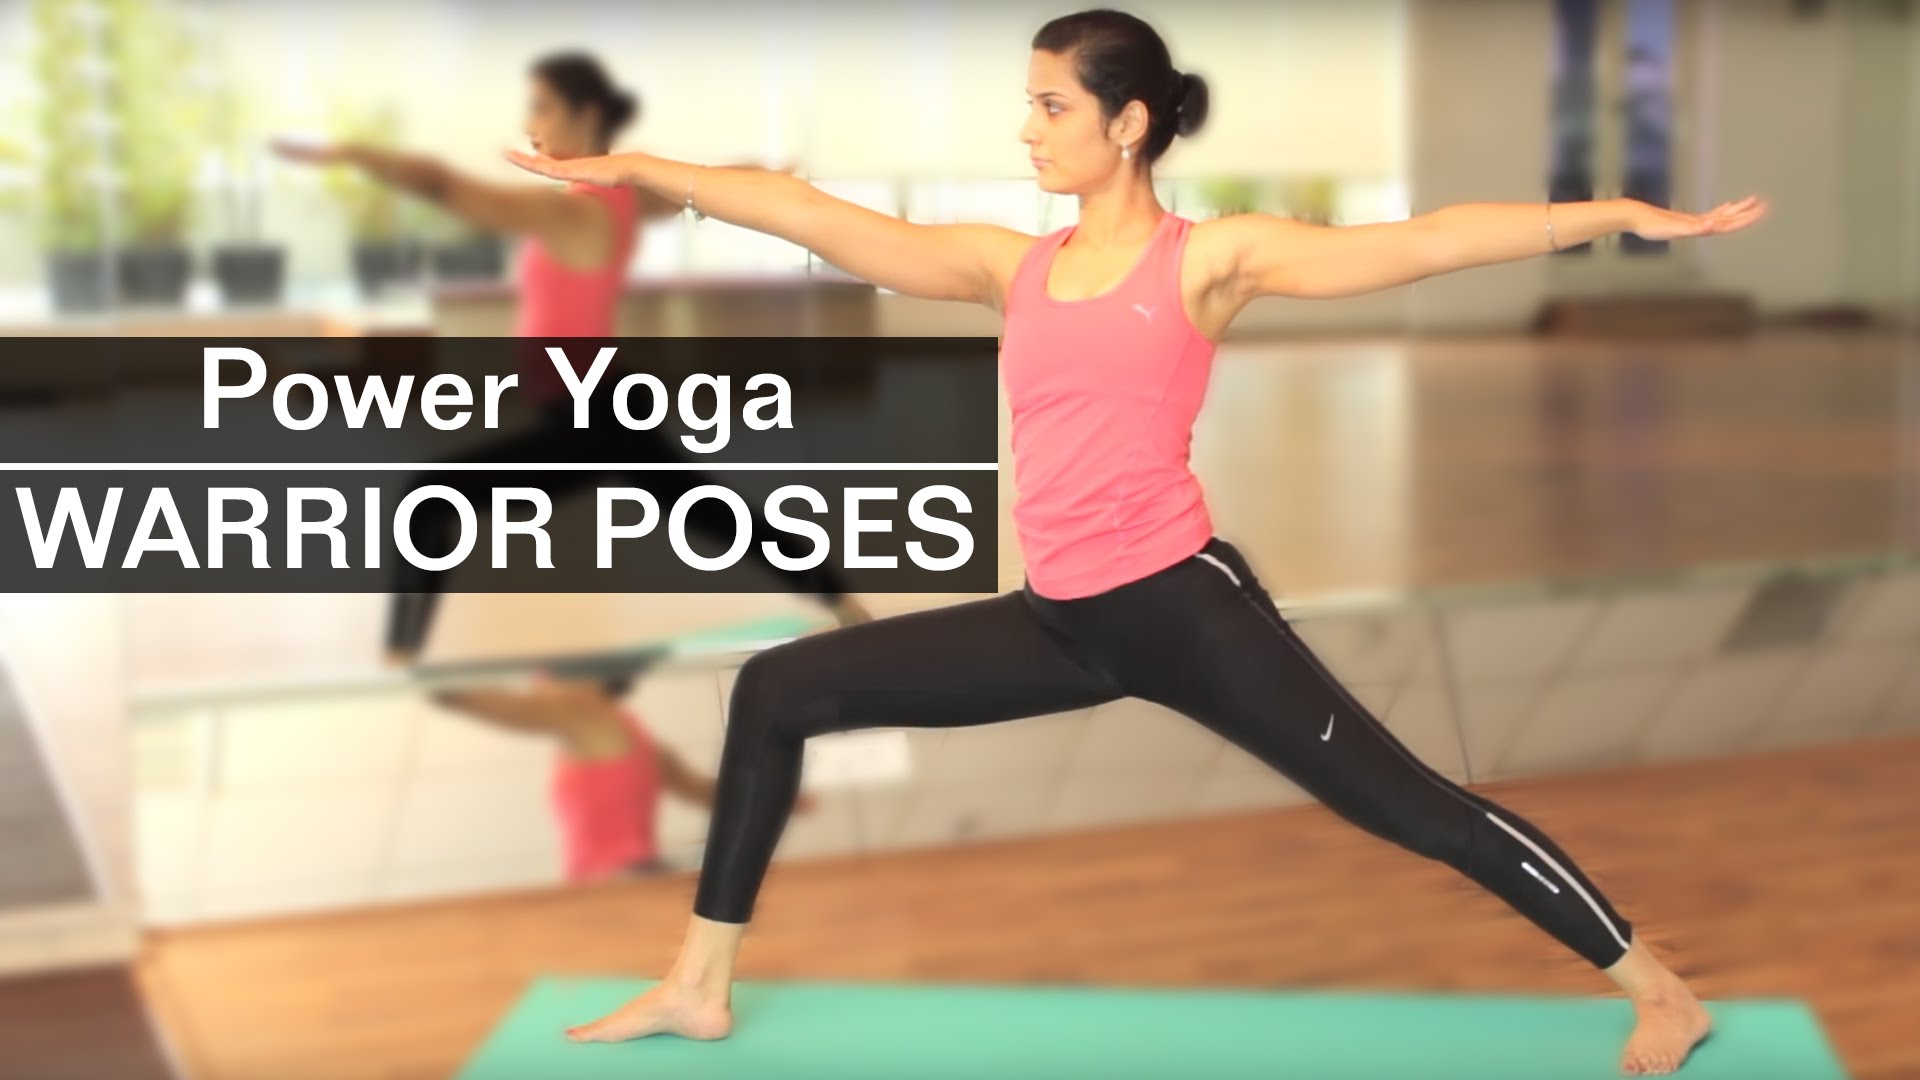 What is power yoga? 2